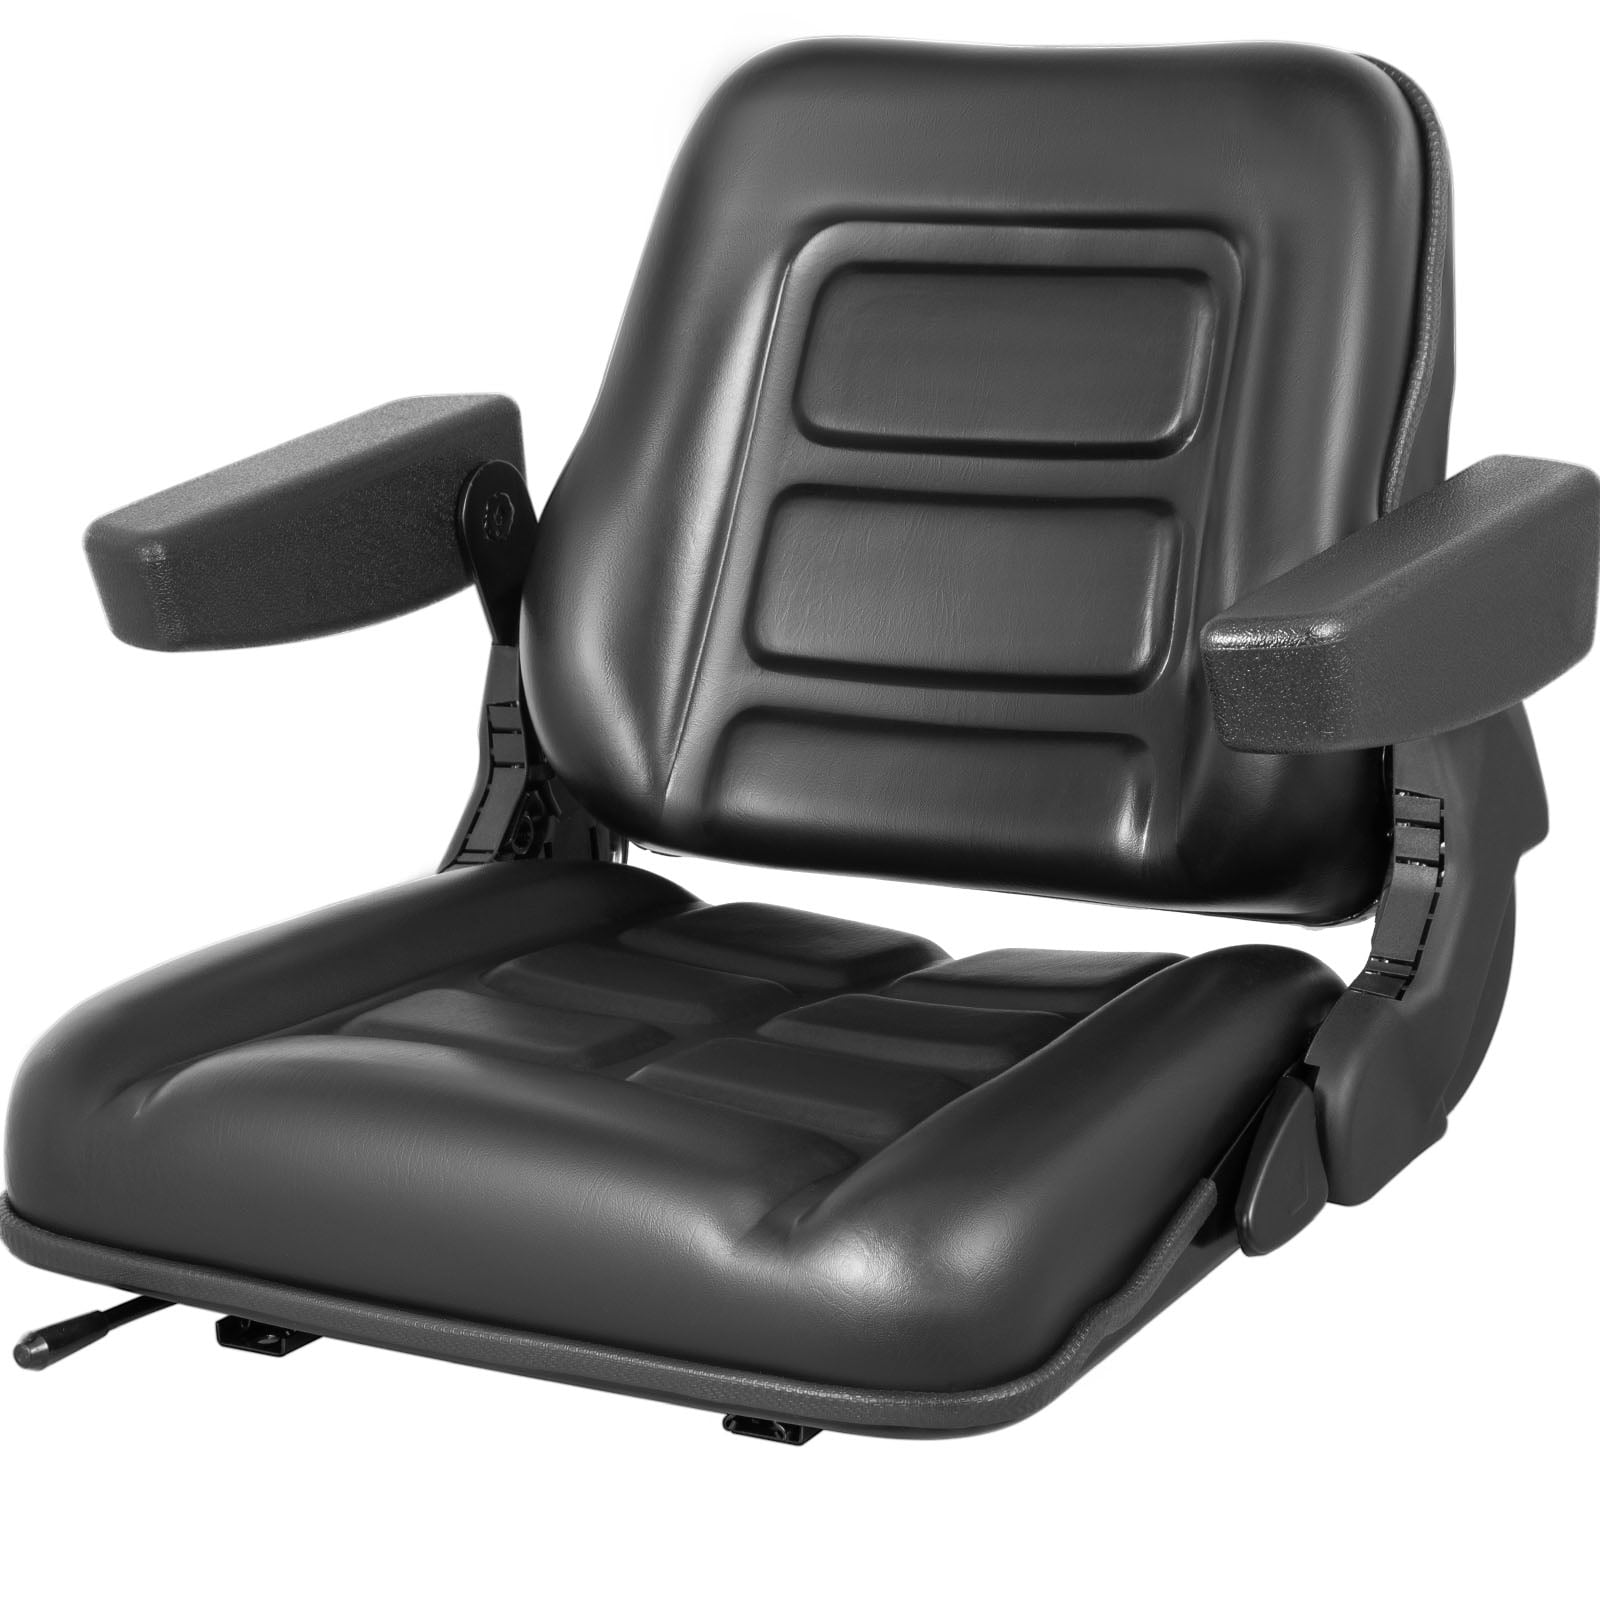 T110BL Black Universal Tractor Seat With Trapezoid Back for sale online 